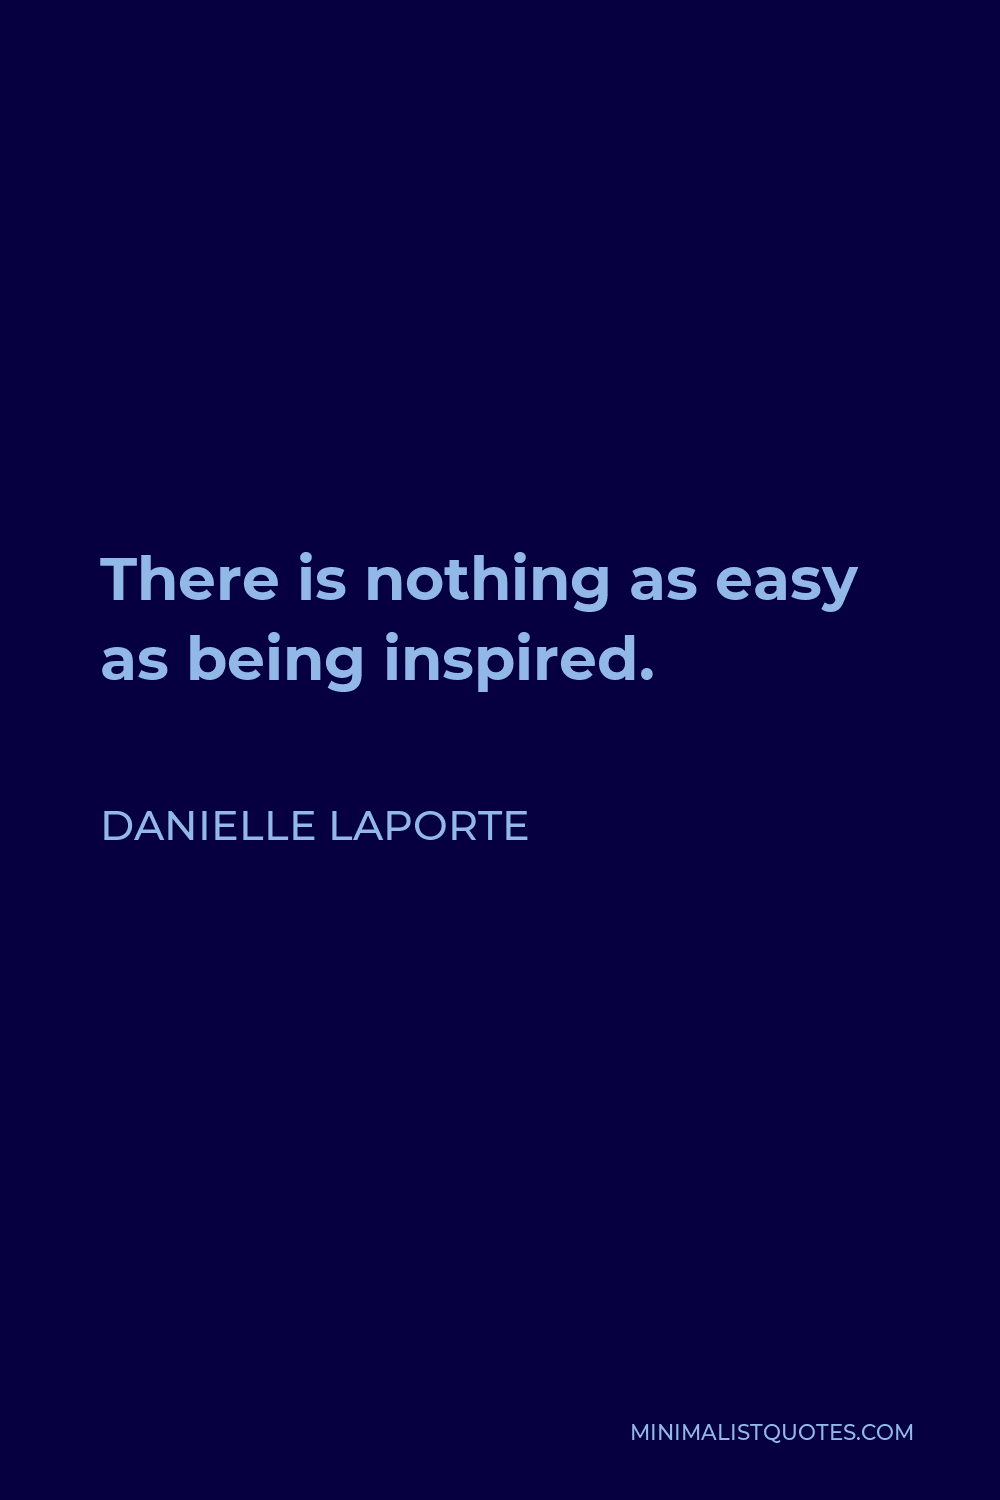 Danielle LaPorte Quote - There is nothing as easy as being inspired.